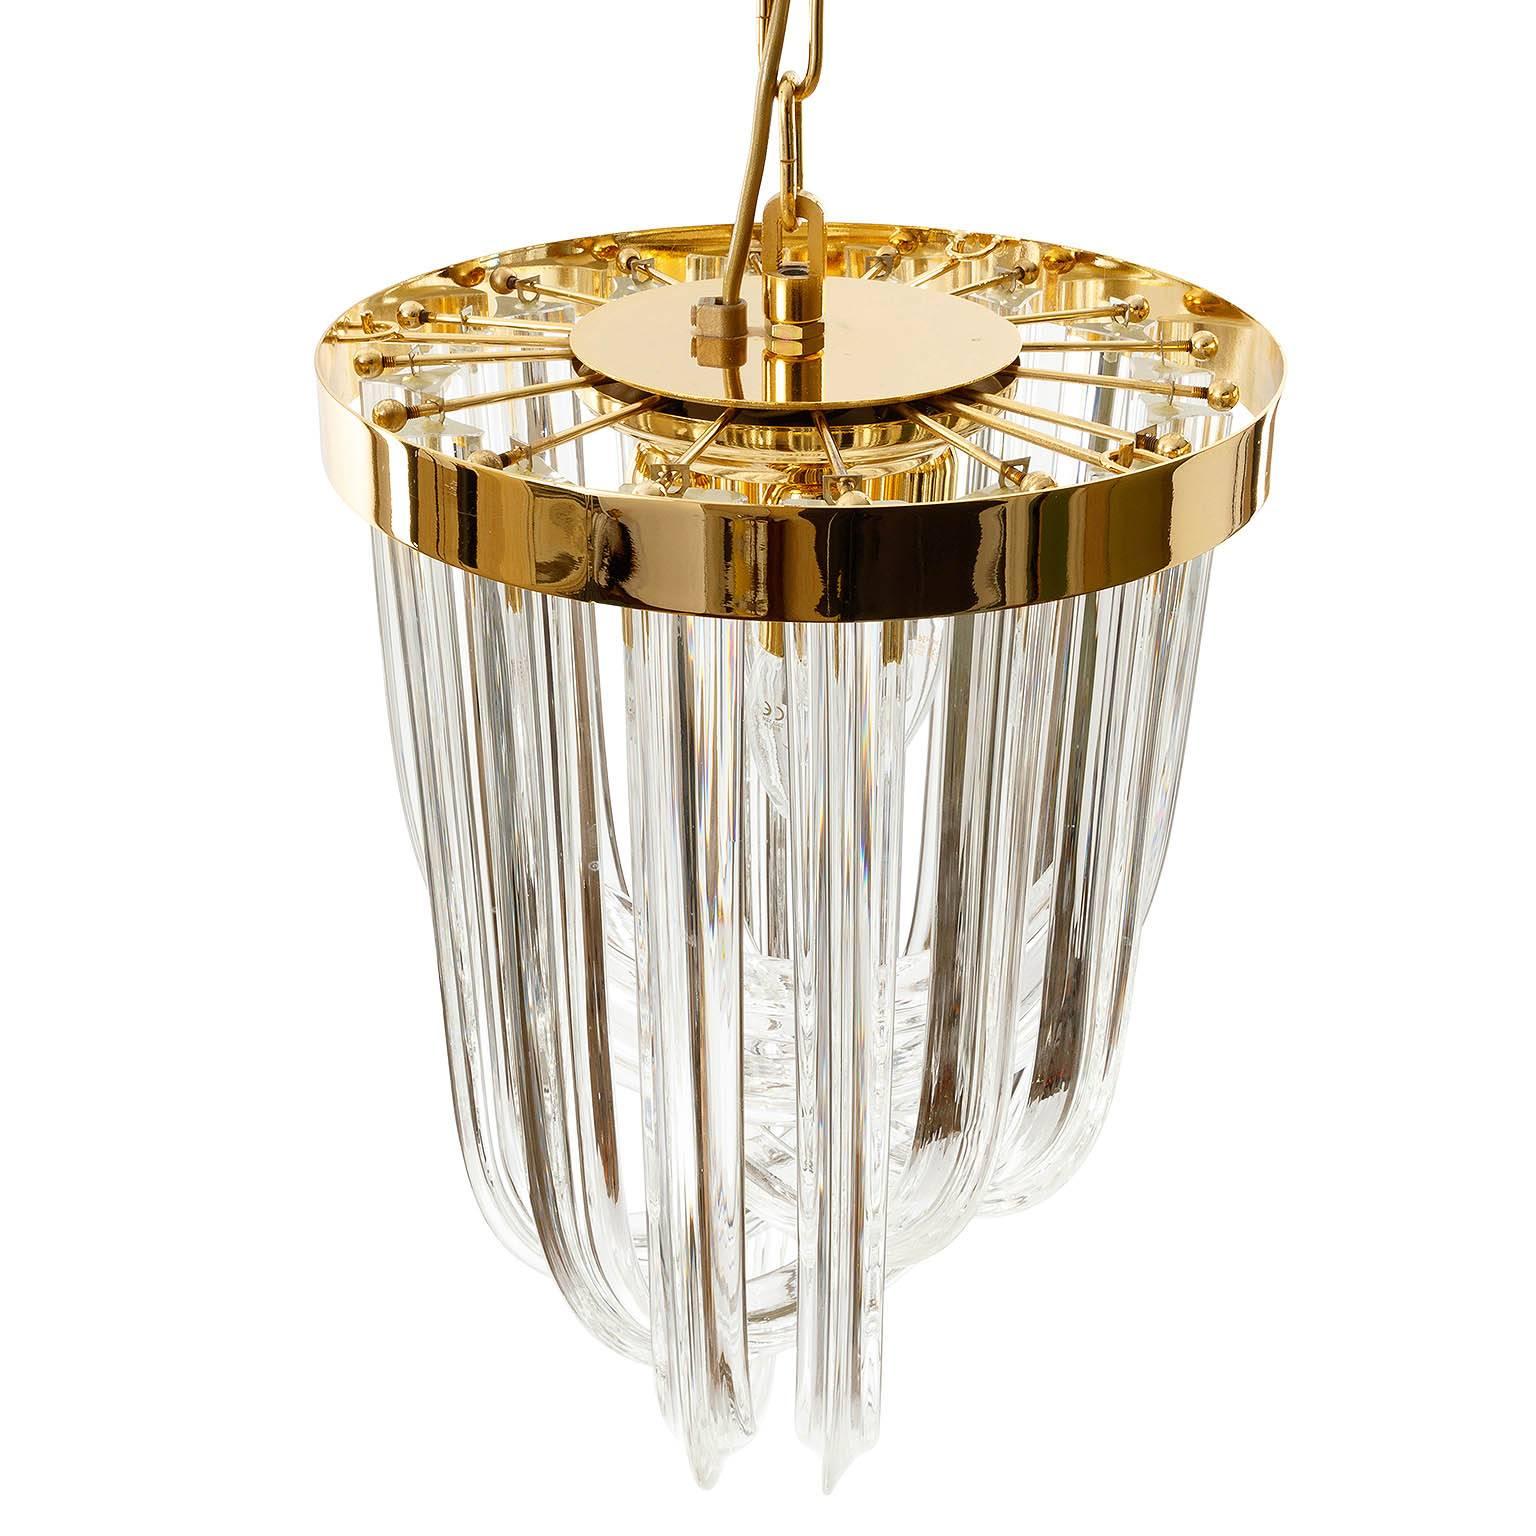 Mid-20th Century Venini Pendant Light Chandelier, Curved Crystal Glass and Gilt Brass, Italy For Sale